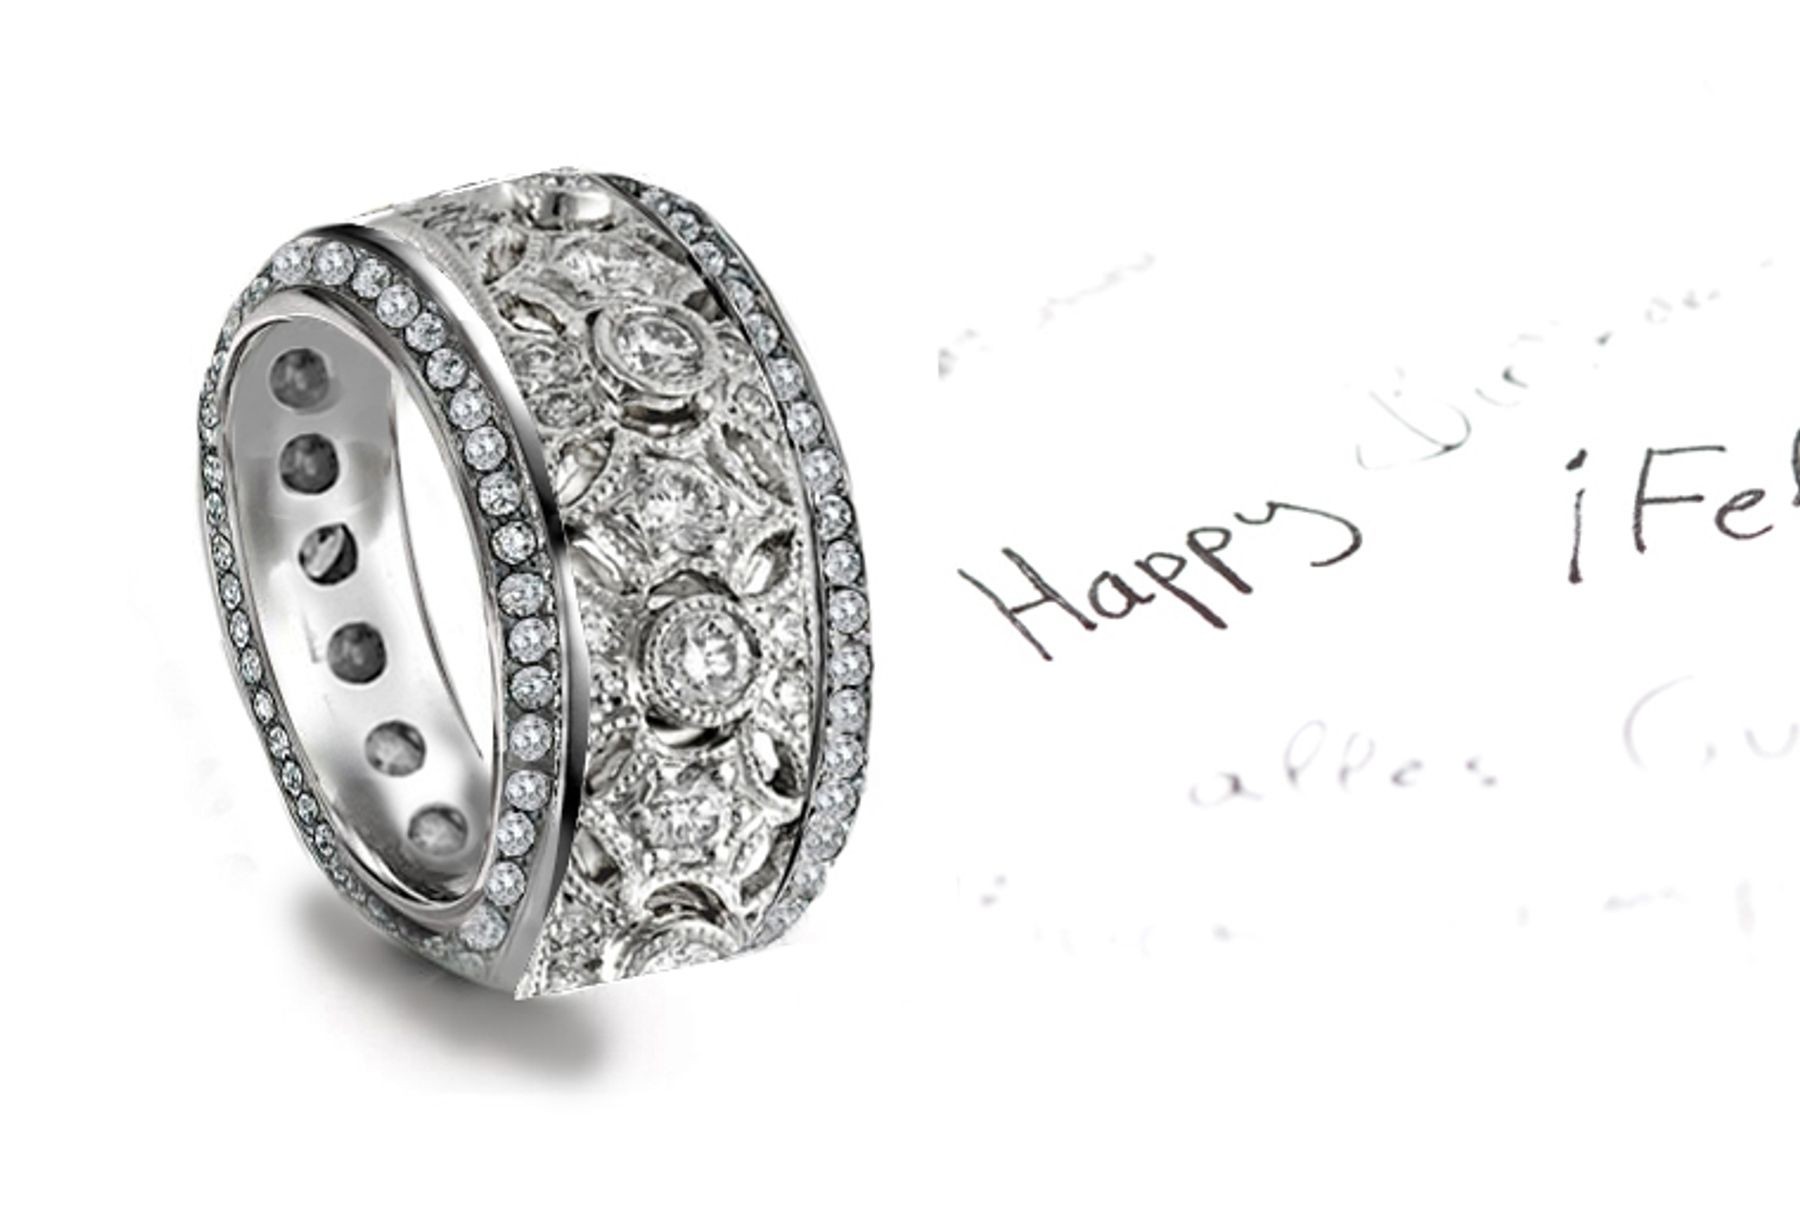 "Very Wide" High Diamond Open Work Gold Band & Diamonds Micropavee in Floral Motifs All Around Halo of Divine Light